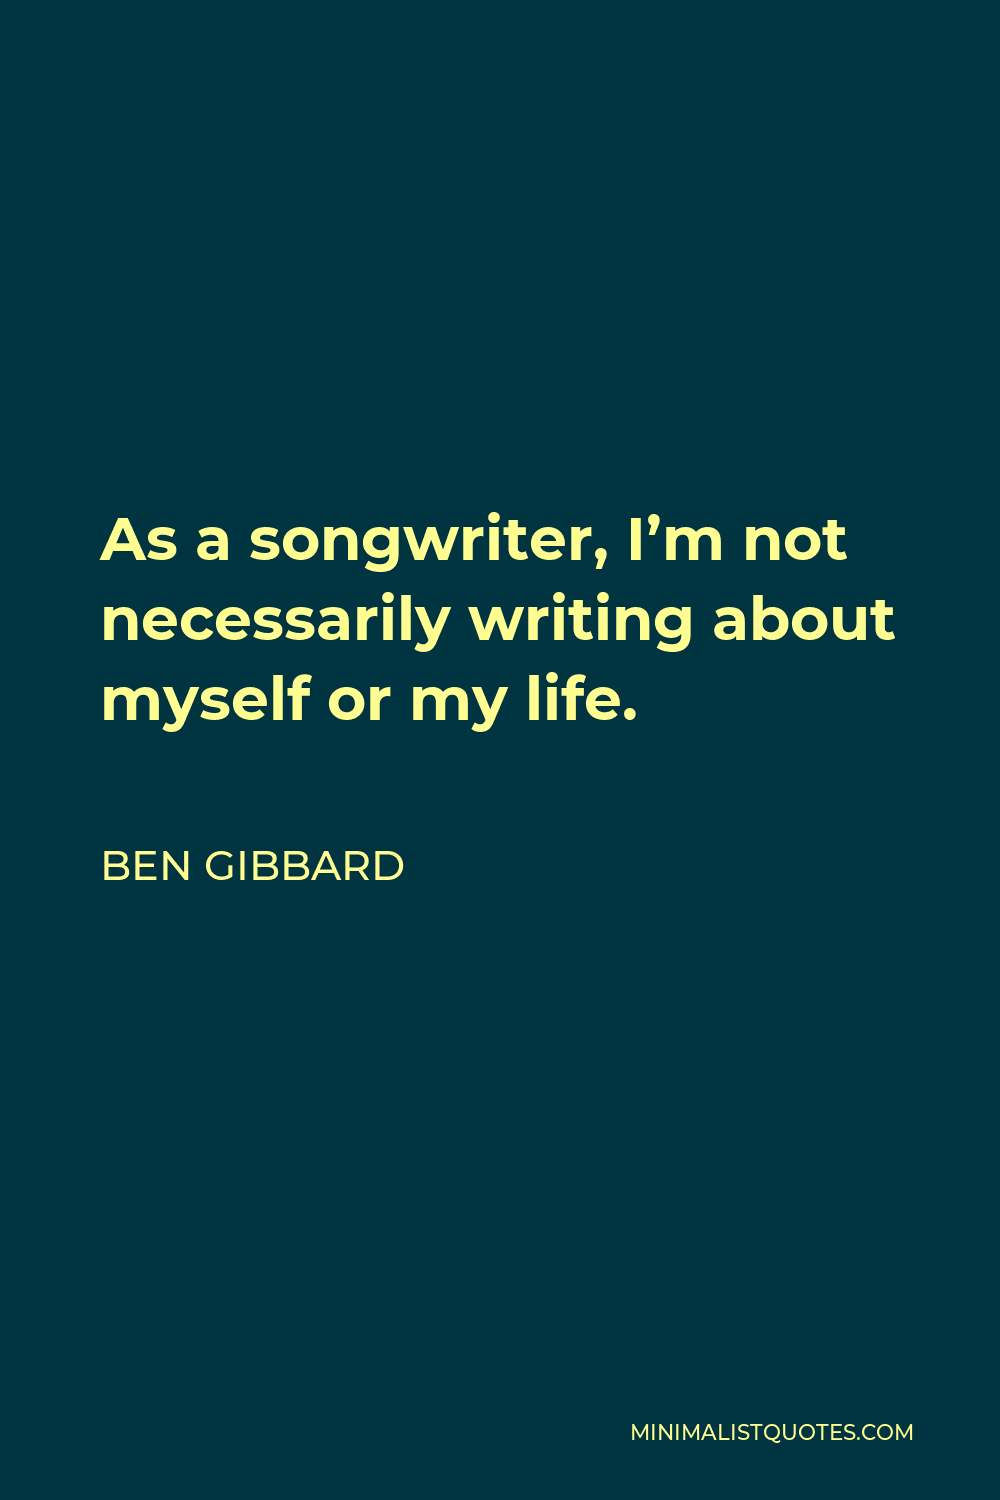 Ben Gibbard Quote - As a songwriter, I’m not necessarily writing about myself or my life.